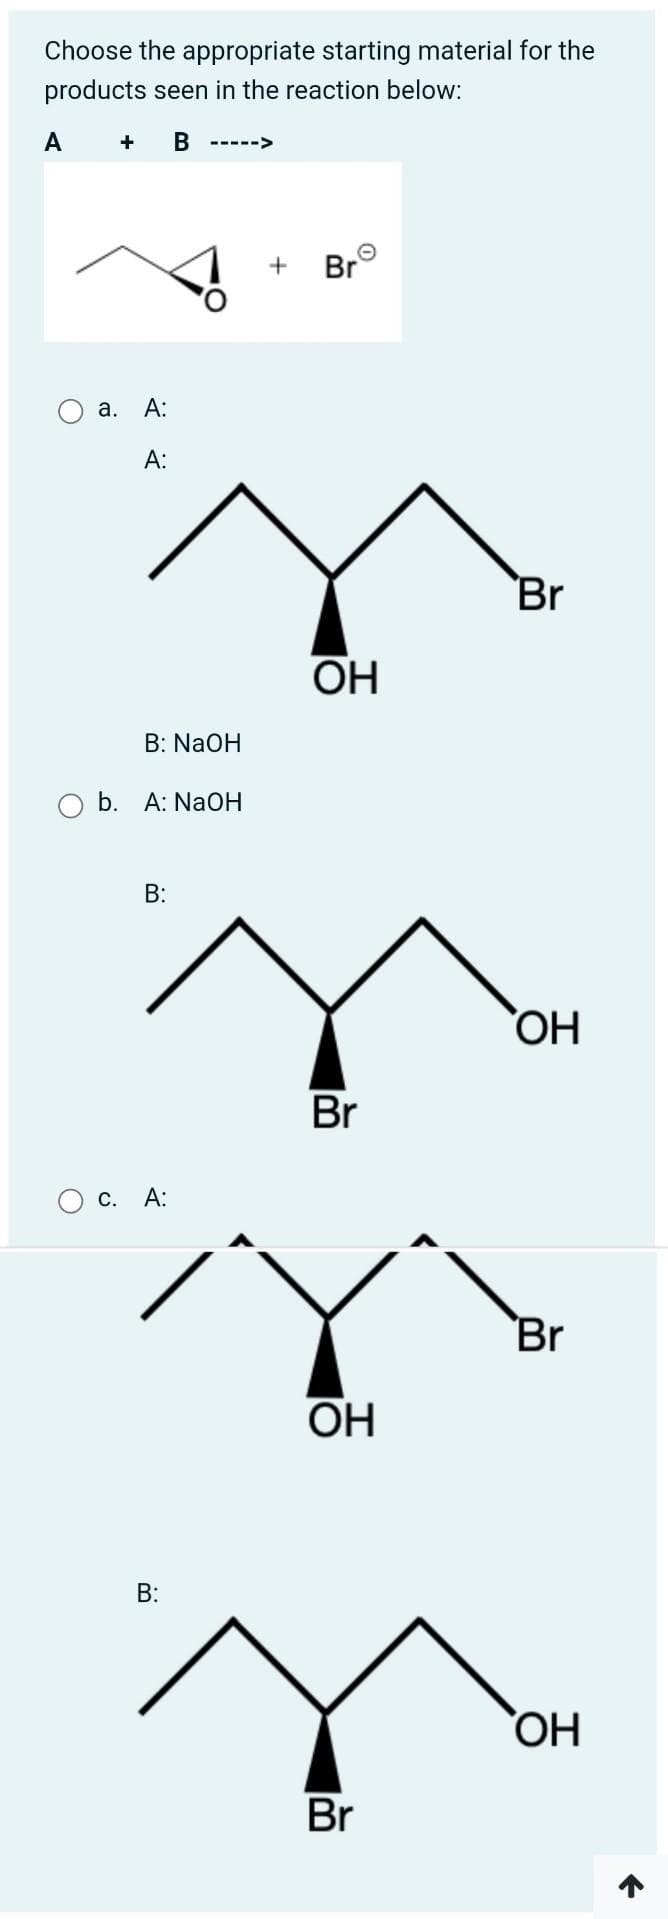 Choose the appropriate starting material for the
products seen in the reaction below:
A
+ B
+ Br
O
O
a. A:
A:
B: NaOH
b. A: NaOH
B:
C. A:
B:
OH
Br
OH
Br
Br
OH
Br
OH